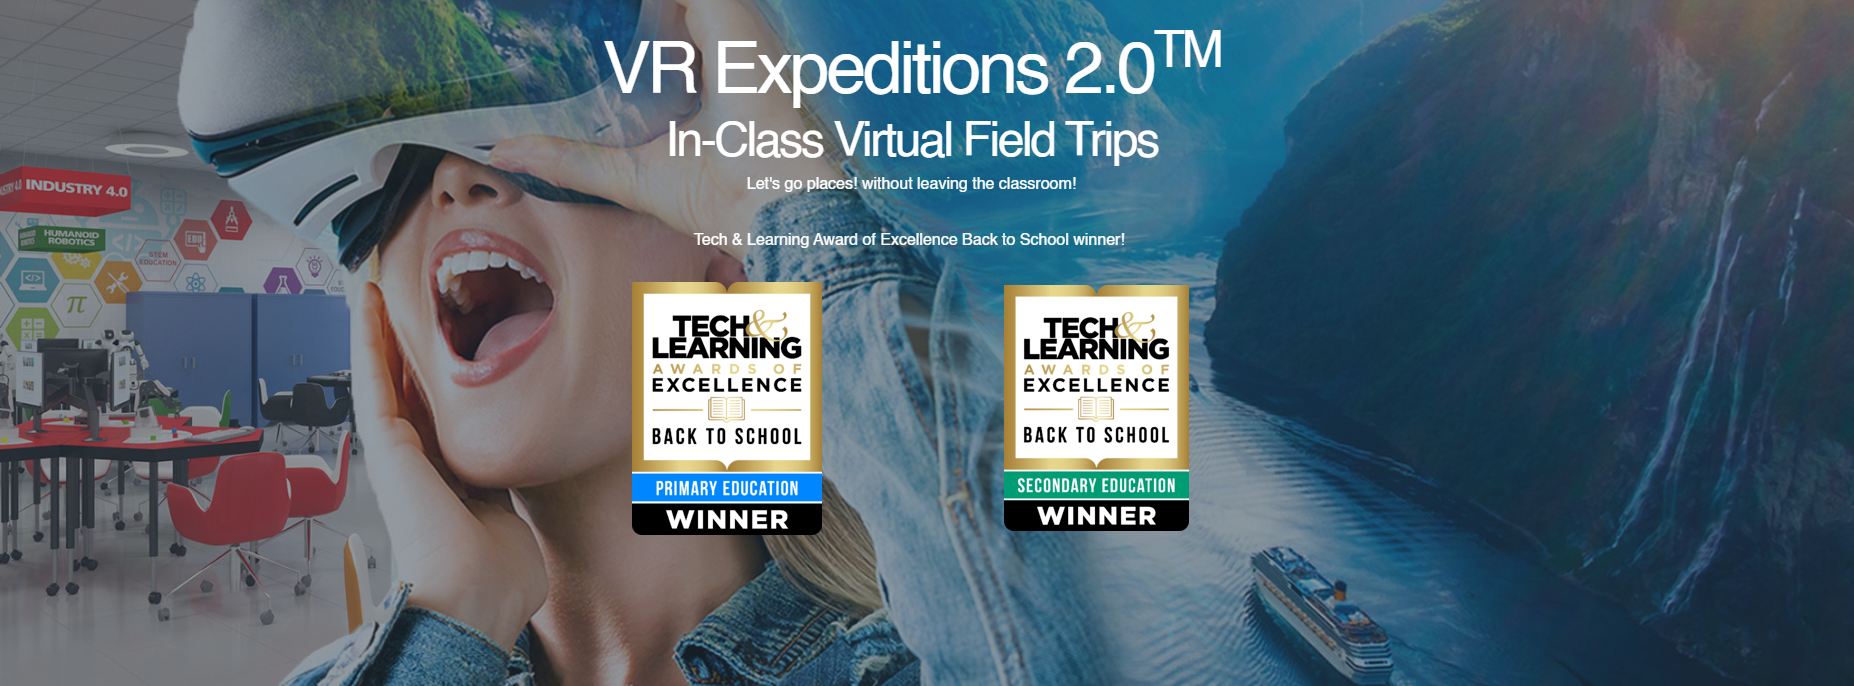 VR Expeditions 2.0 won the Tech & Learning Awards of Excellence Back To School for Primary and Secondary Education!